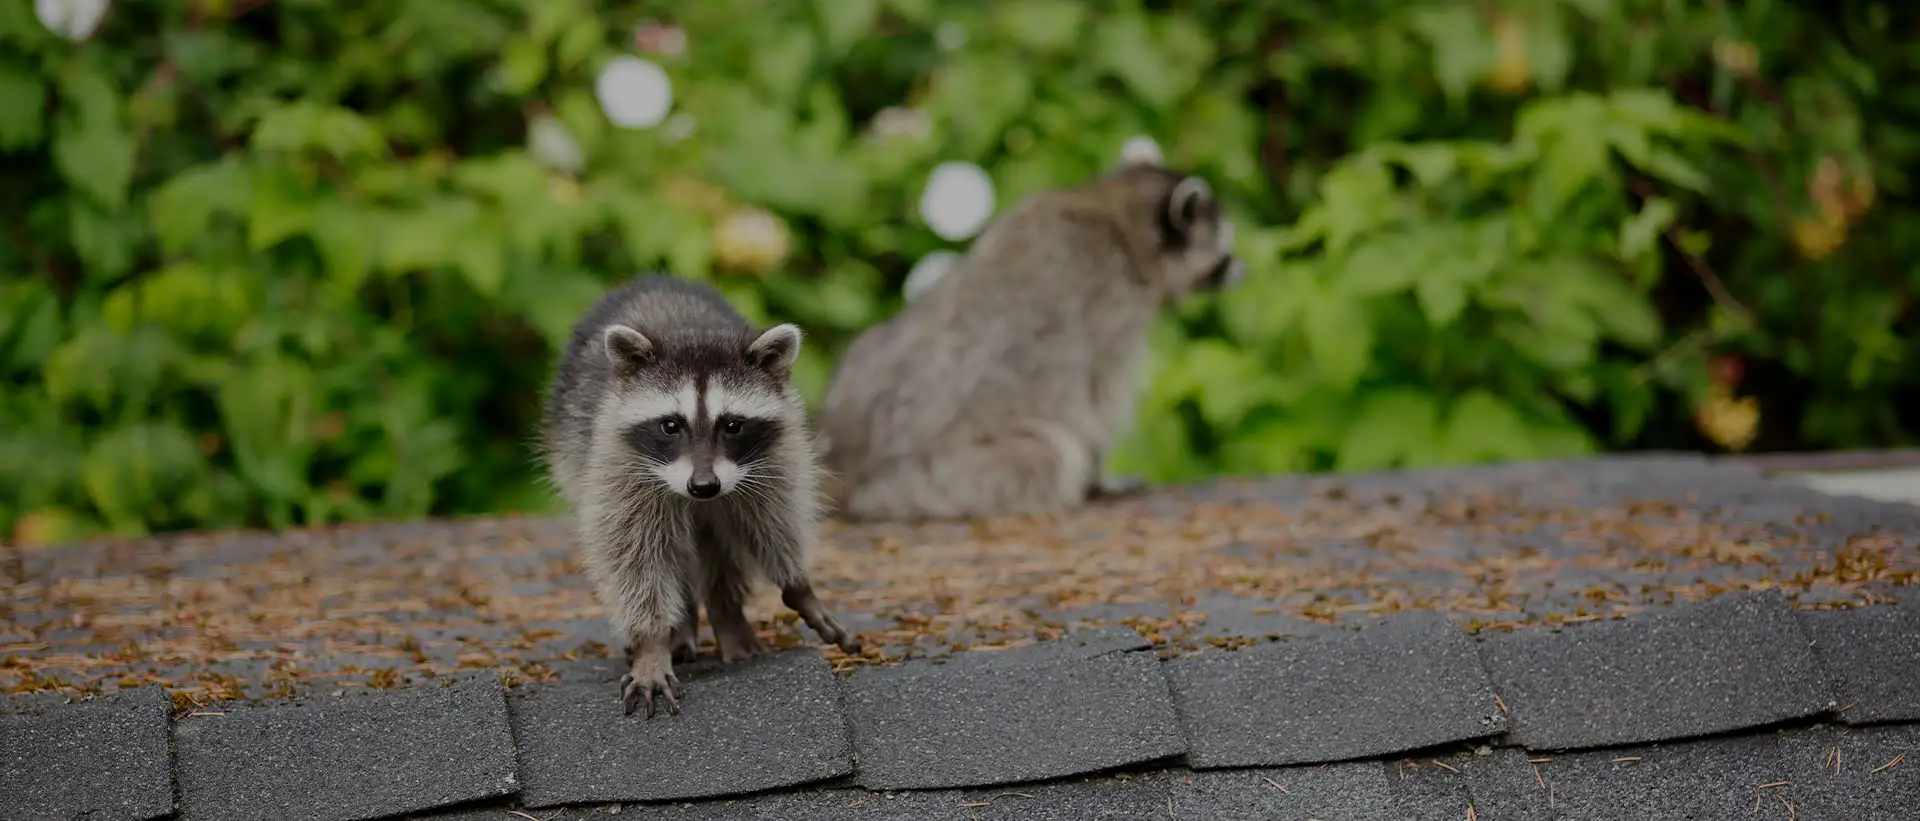 Crawlspace Raccoon Removal Service | Cherry Hill New Jersey